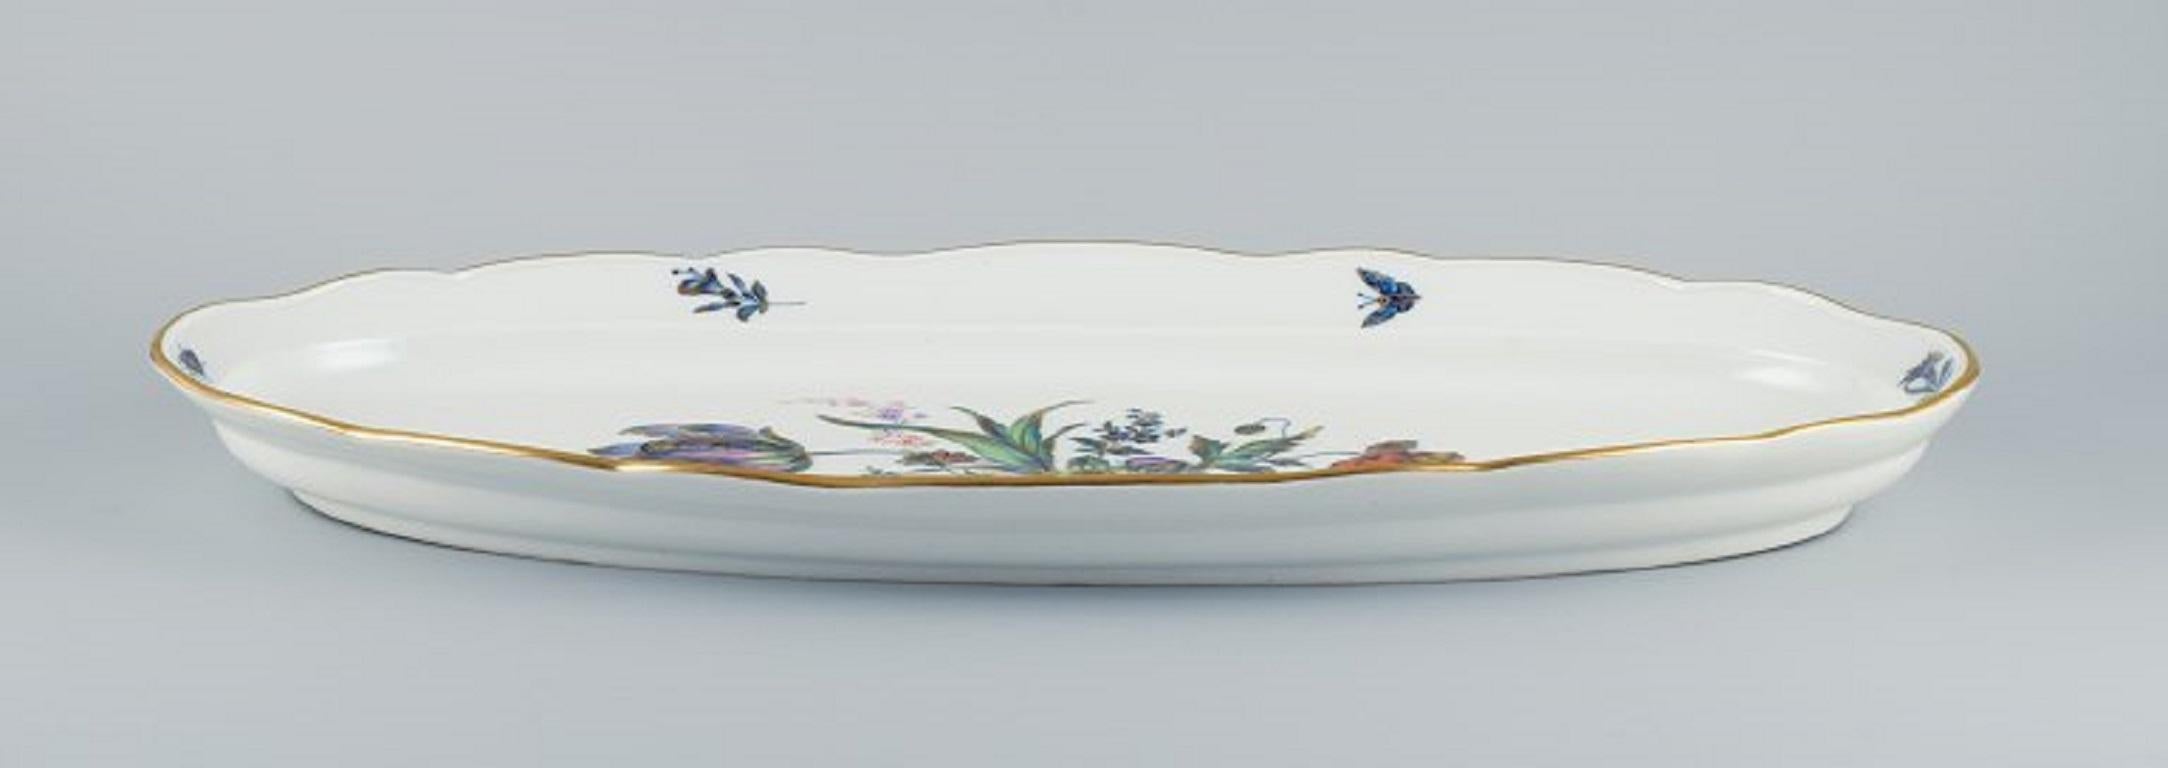 Meissen, Germany. 
Large fish platter, hand painted with flowers and insects and gold rim.
Approx. 1900.
In perfect condition.
First factory quality.
Marked.
Dimensions: L 62.5 x D 30.5 x H 5.5 cm.